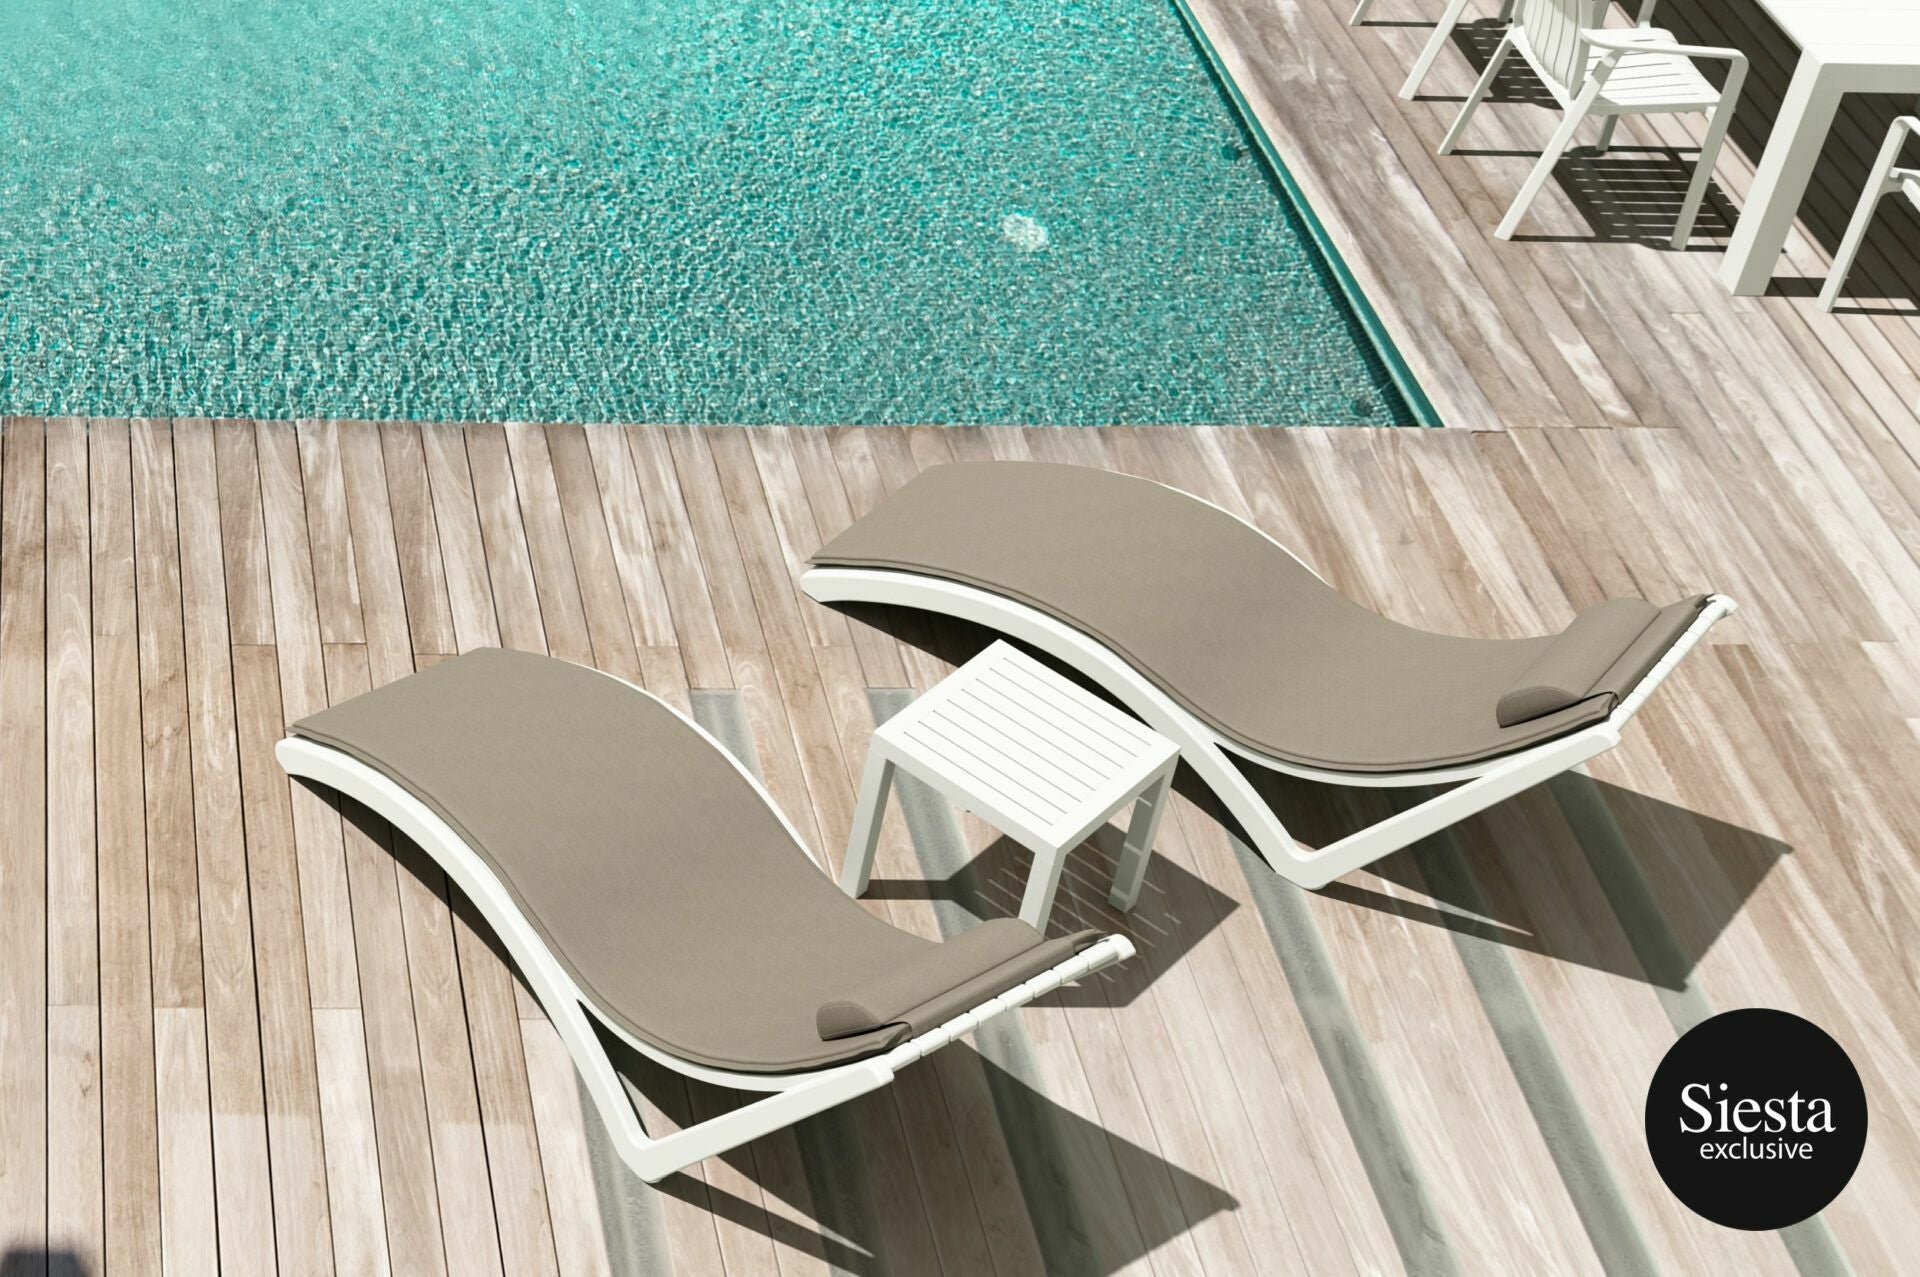 Pool Side 3 Piece Slim Sun Lounger Package with Ocean Side Table - White with Taupe Cushion